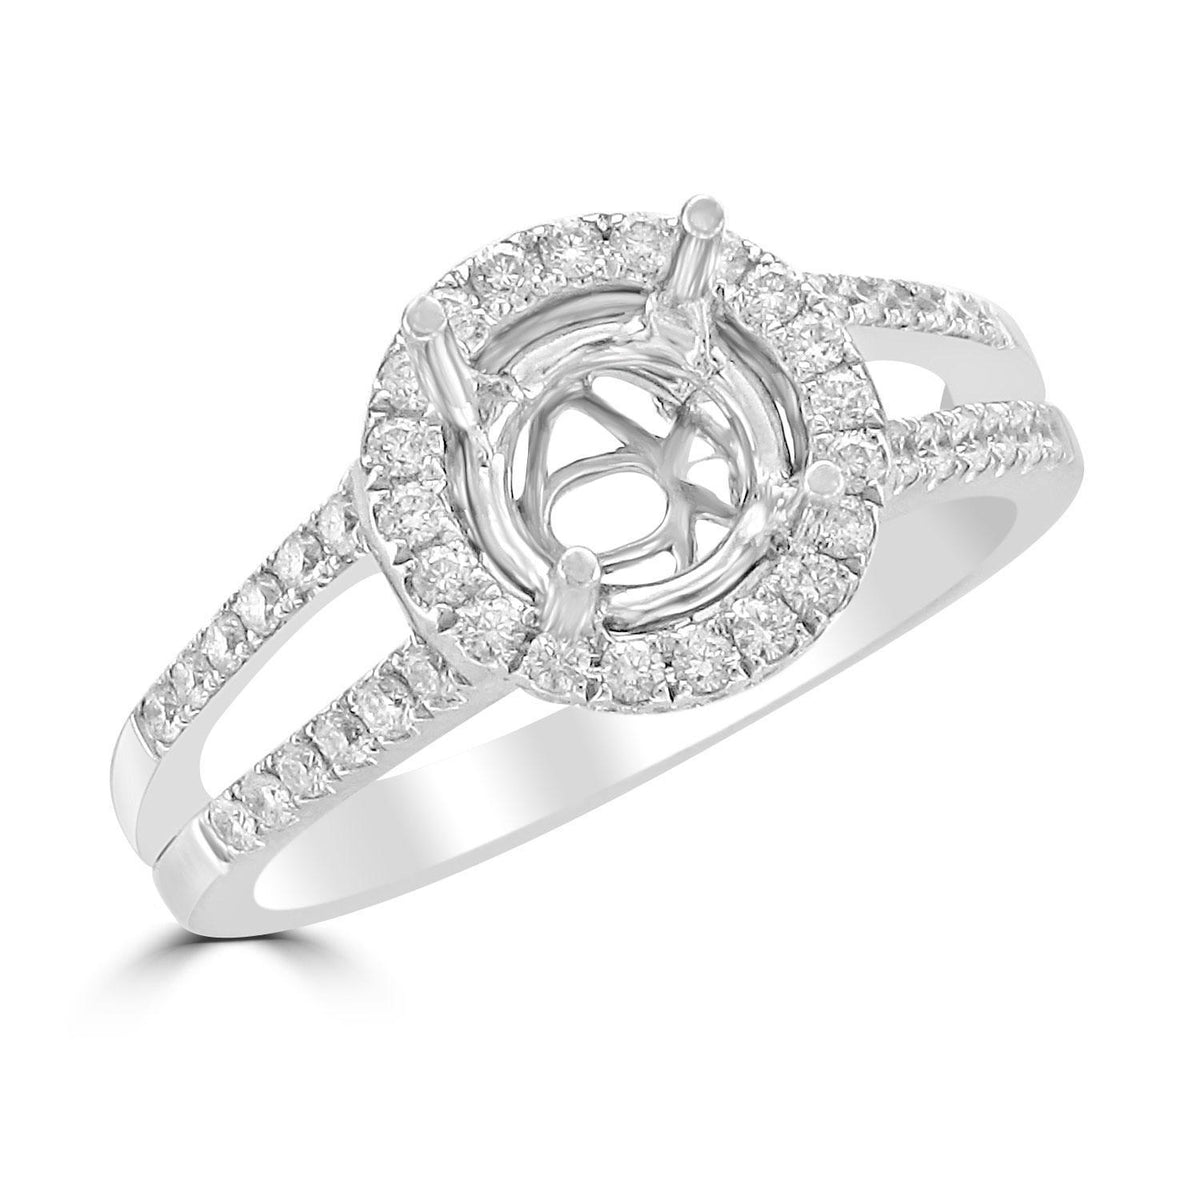 18KT White Gold .47 CTW Diamond Halo Setting for 1-1.25 CT Round 4,4.5,5,5.5,6,6.5,7,7.5,8,8.5,9